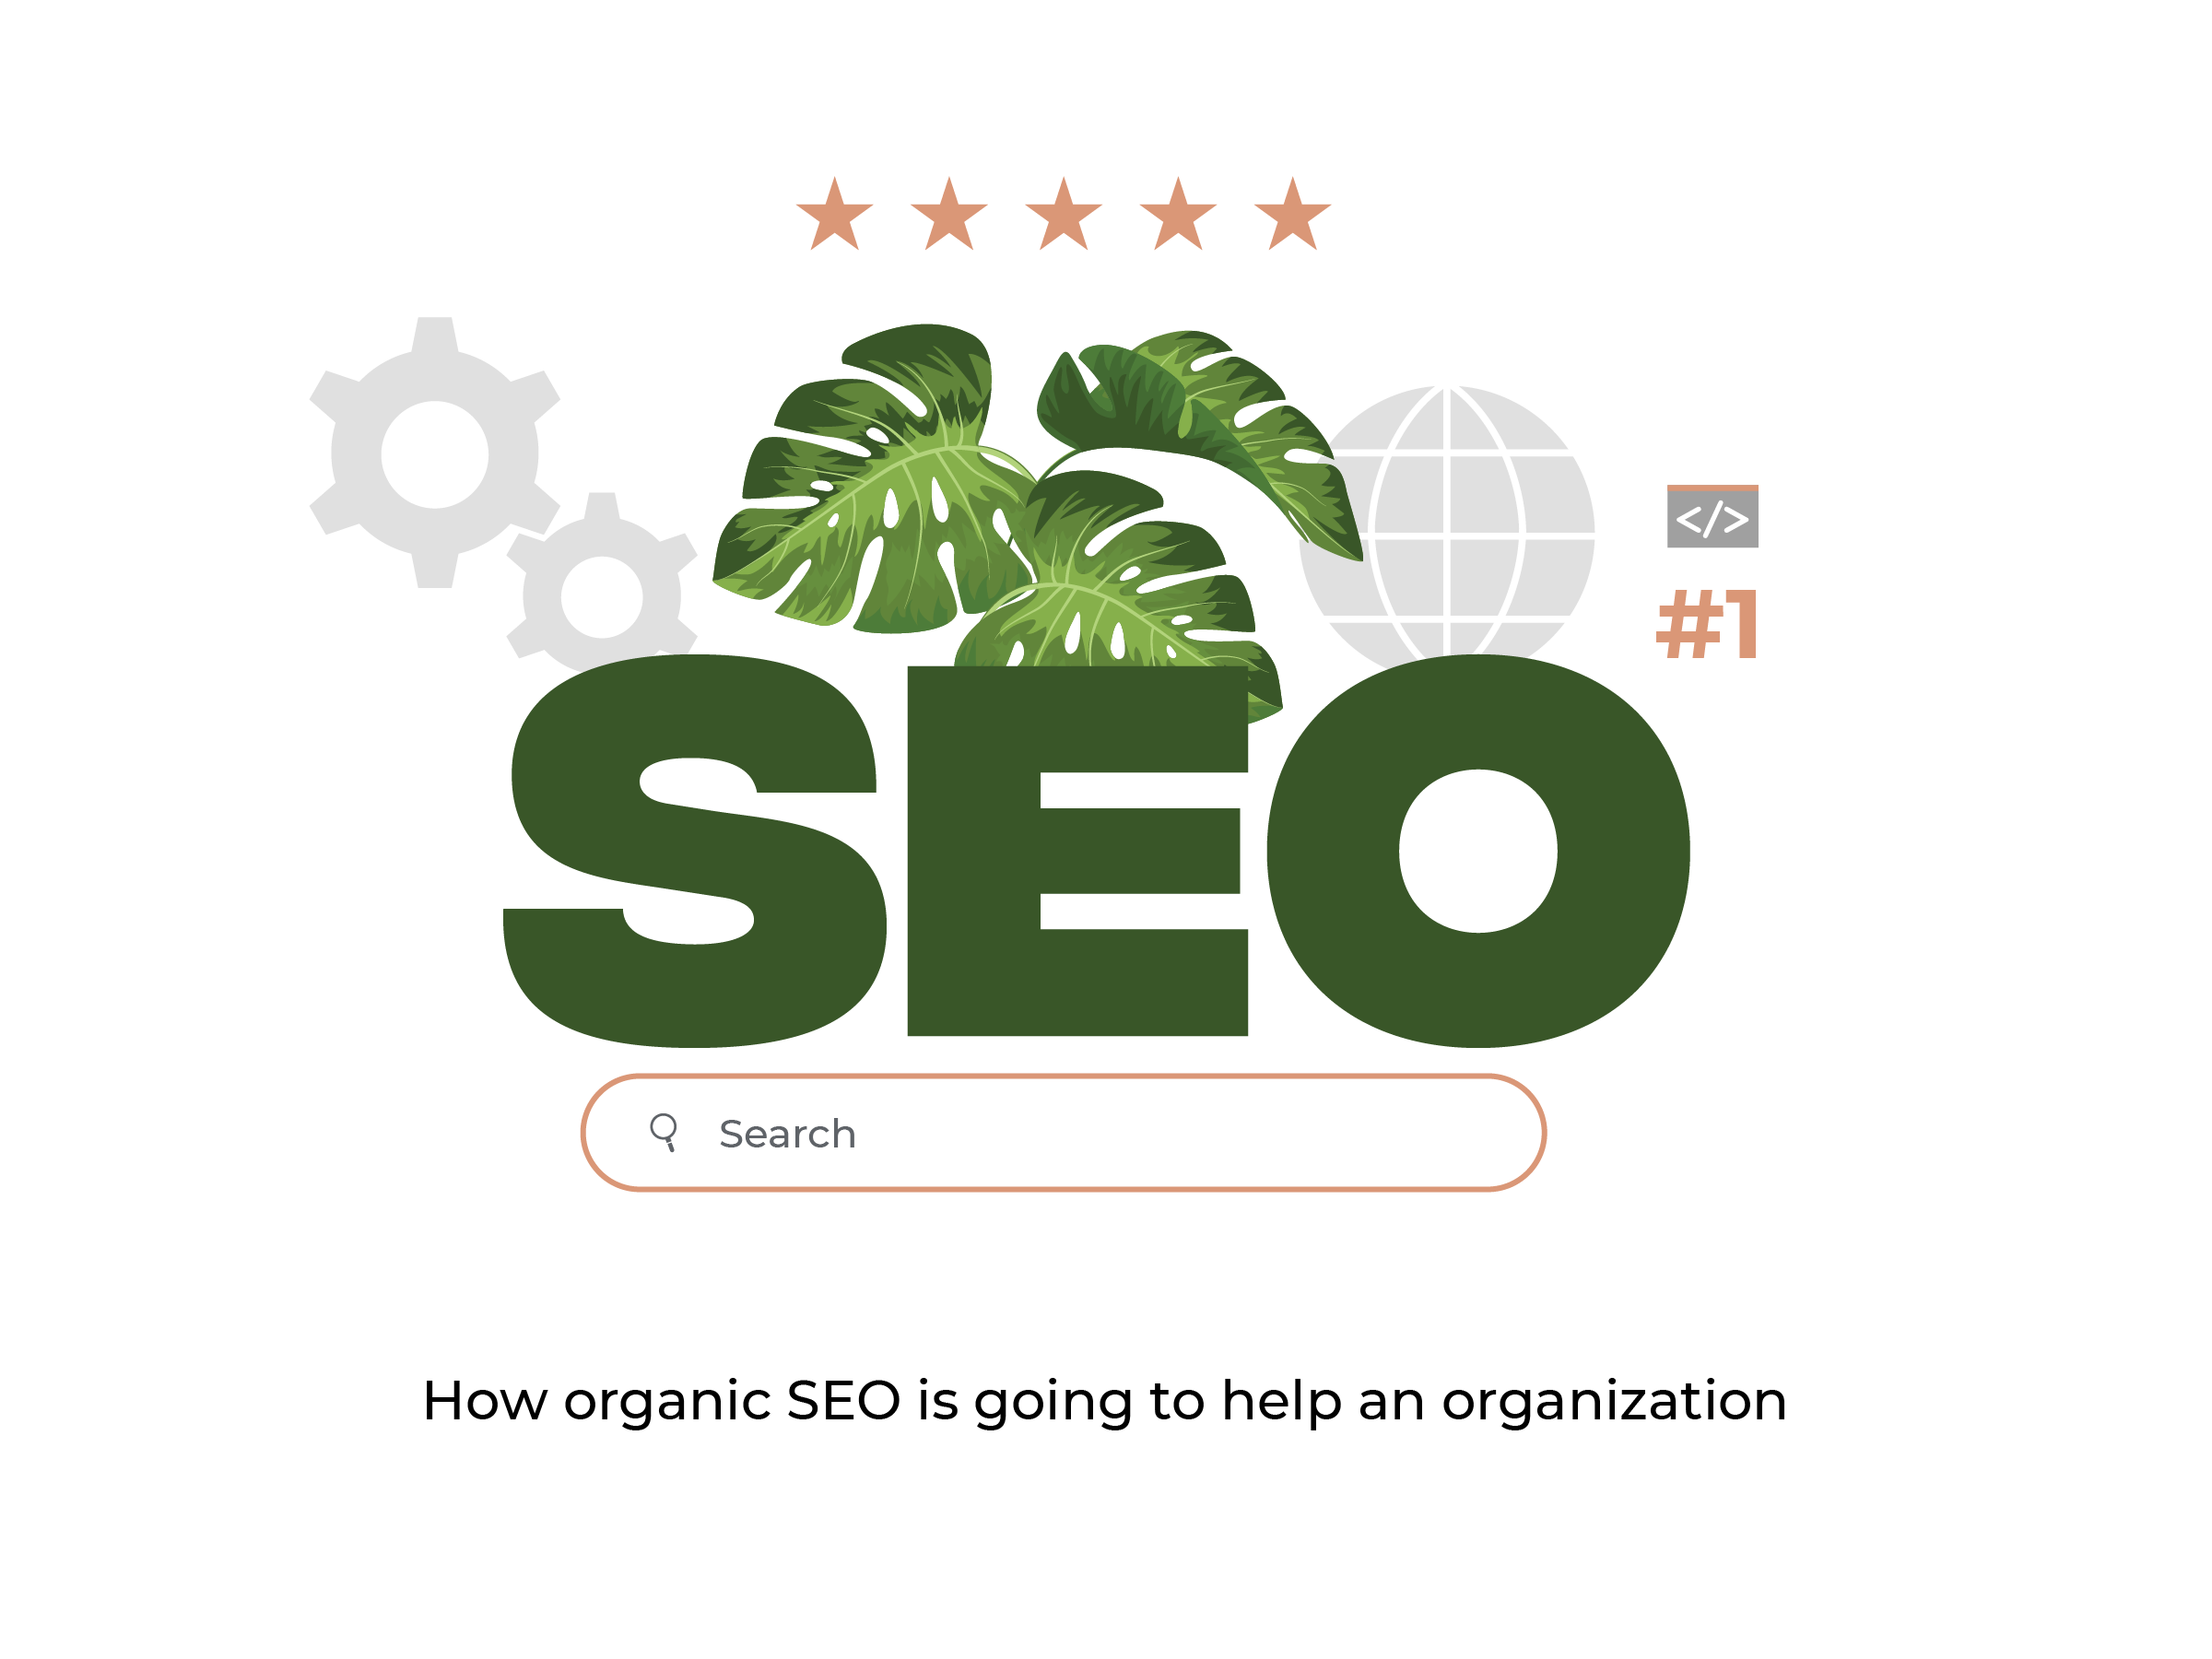 Leaves with SEO and stars suggesting organic SEO's help in an organization.